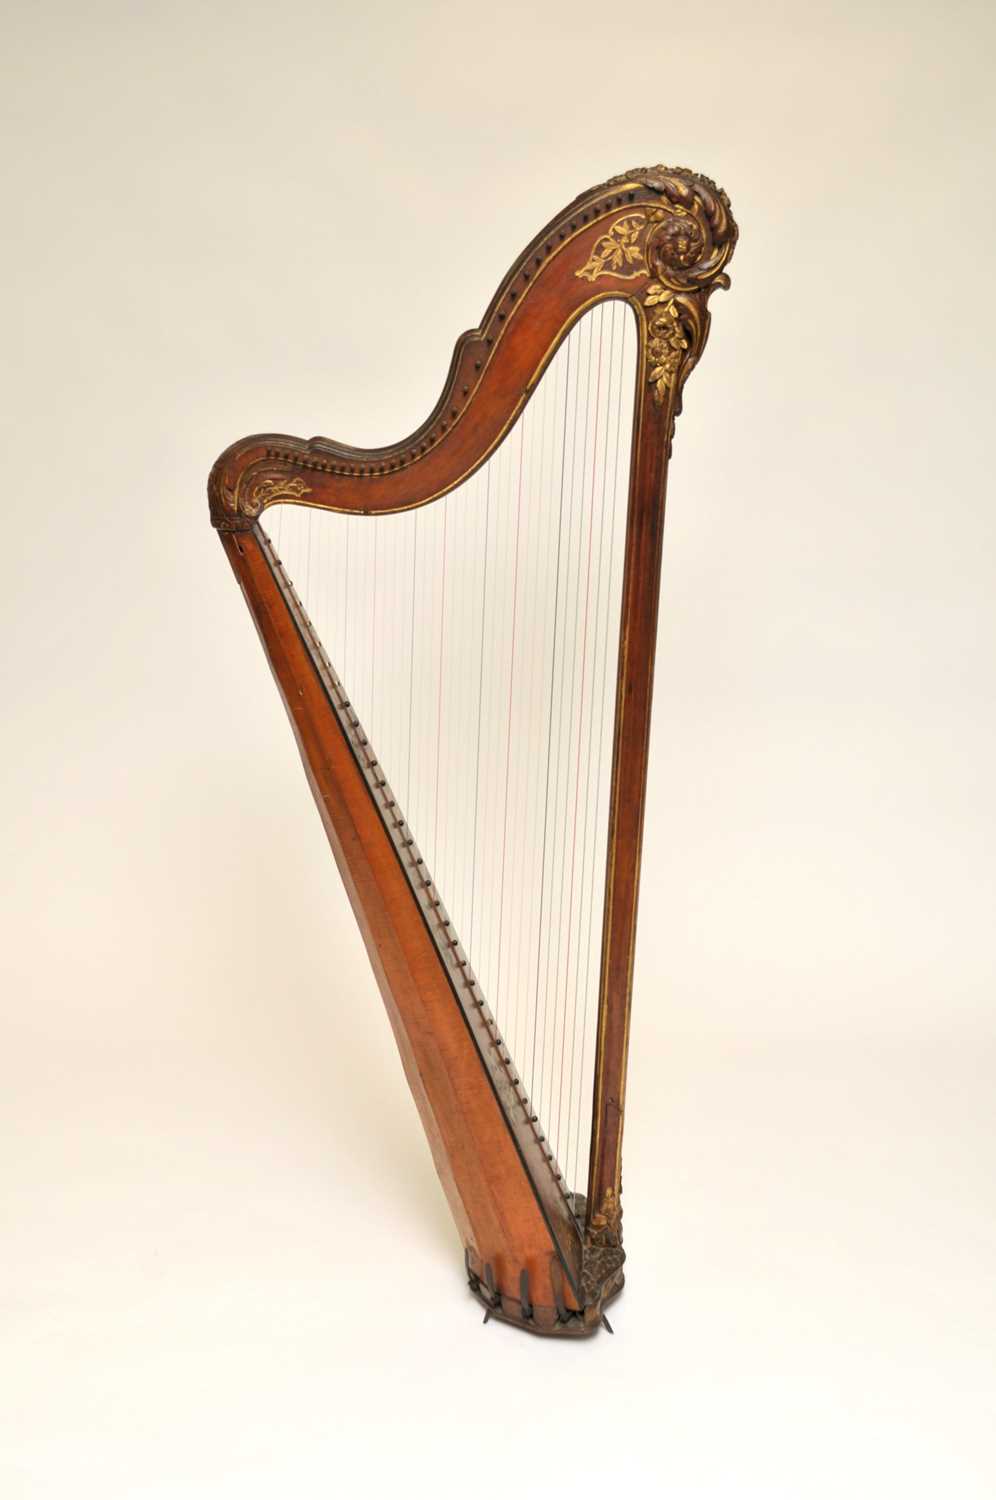 Lot 415 - A good 18th century French harp by Walster, Paris